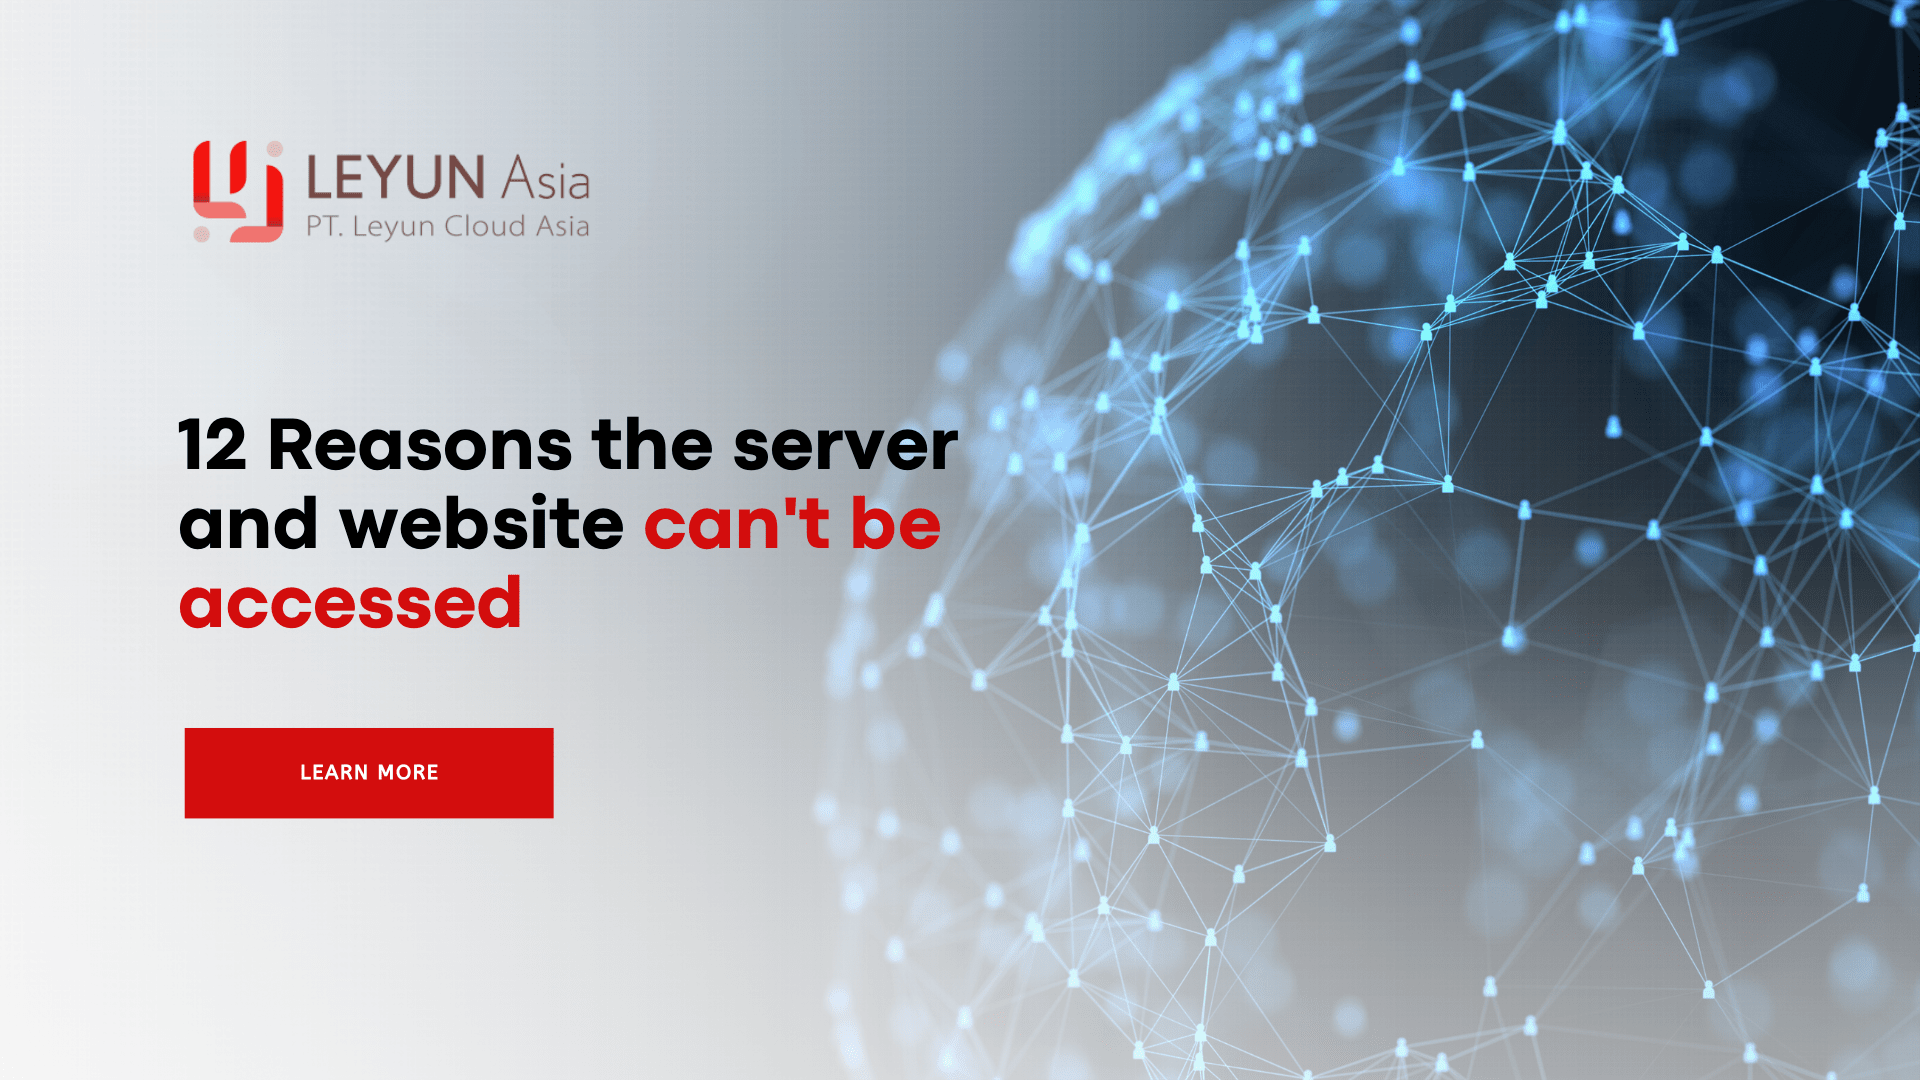 12 Reasons the server and website